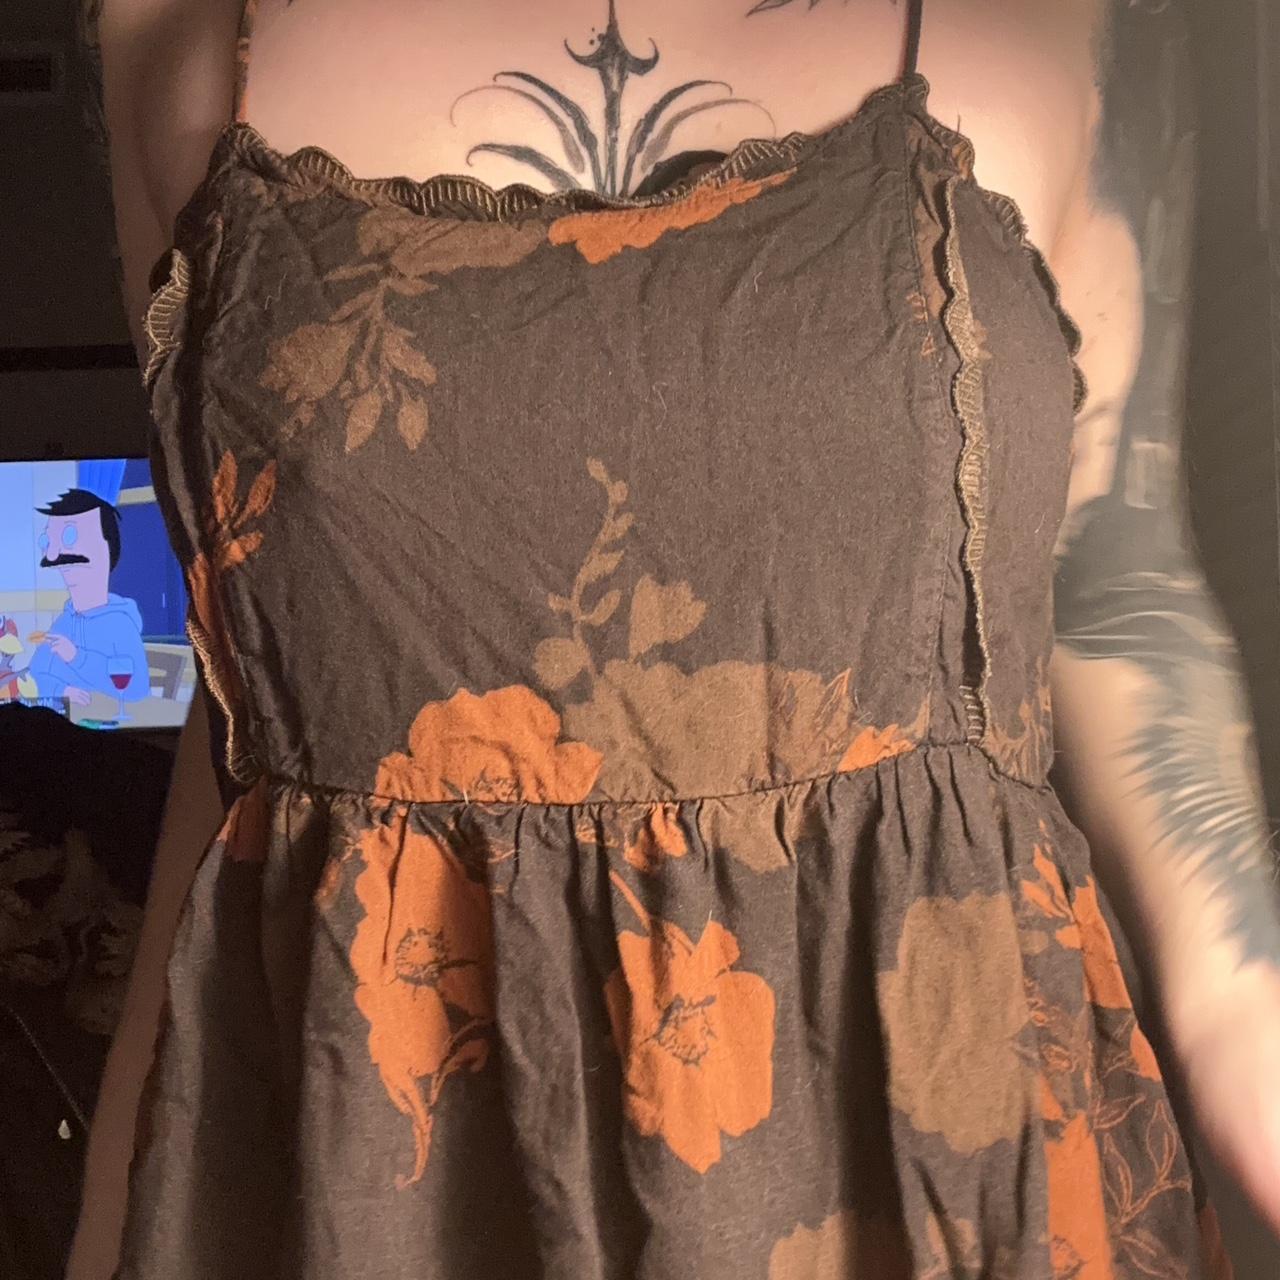 Urban Outfitters Women's Orange and Brown Dress (2)